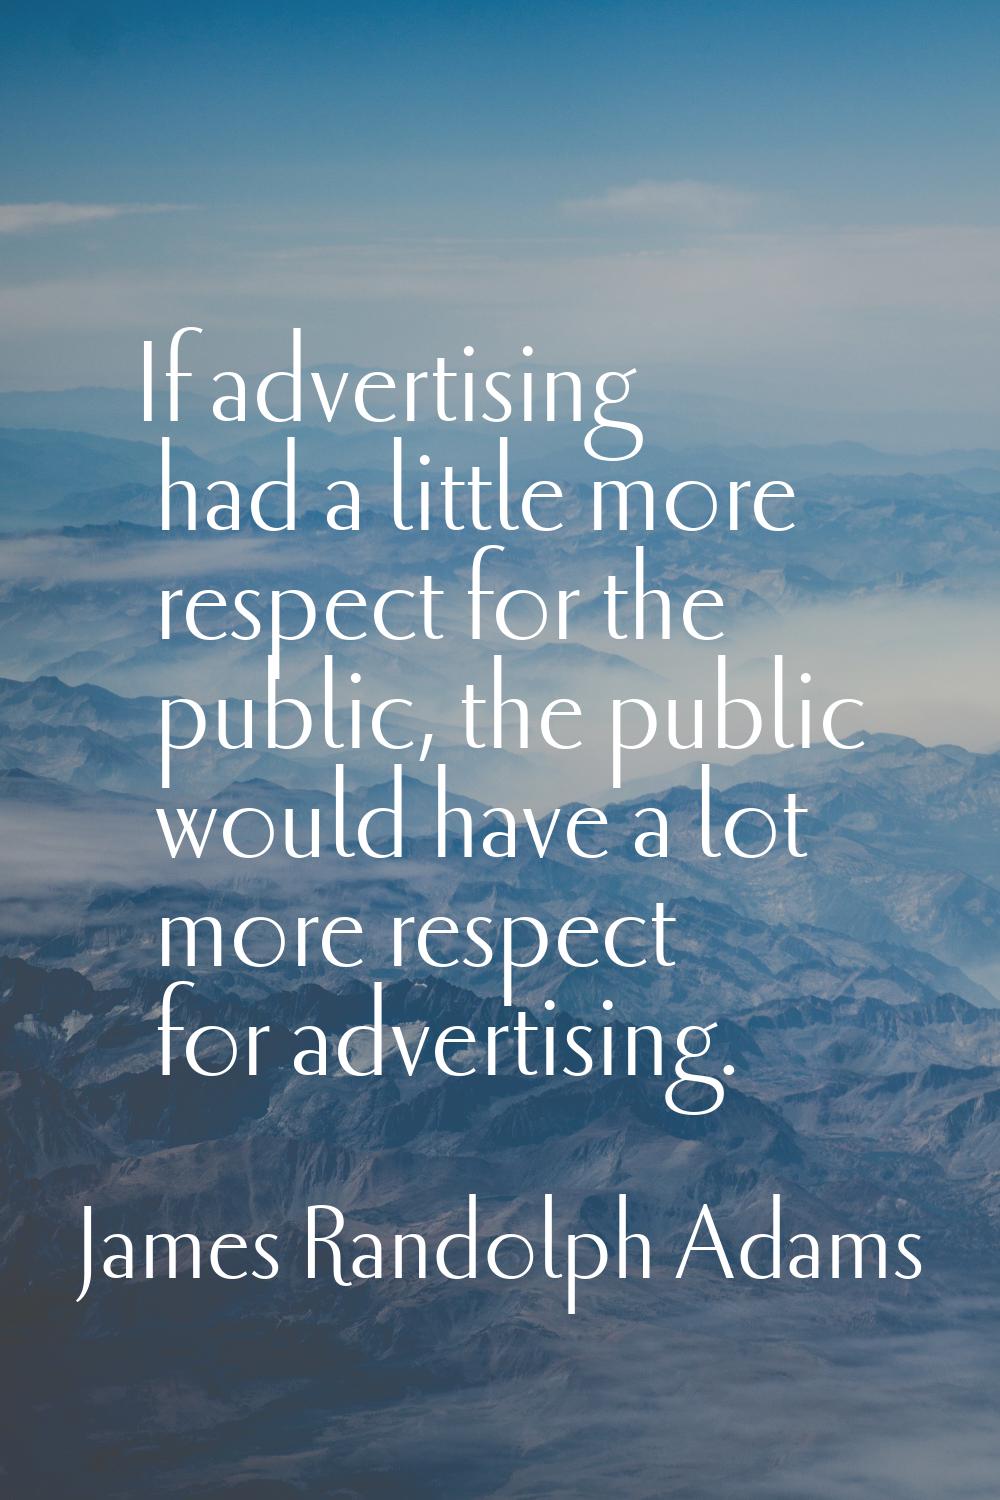 If advertising had a little more respect for the public, the public would have a lot more respect f